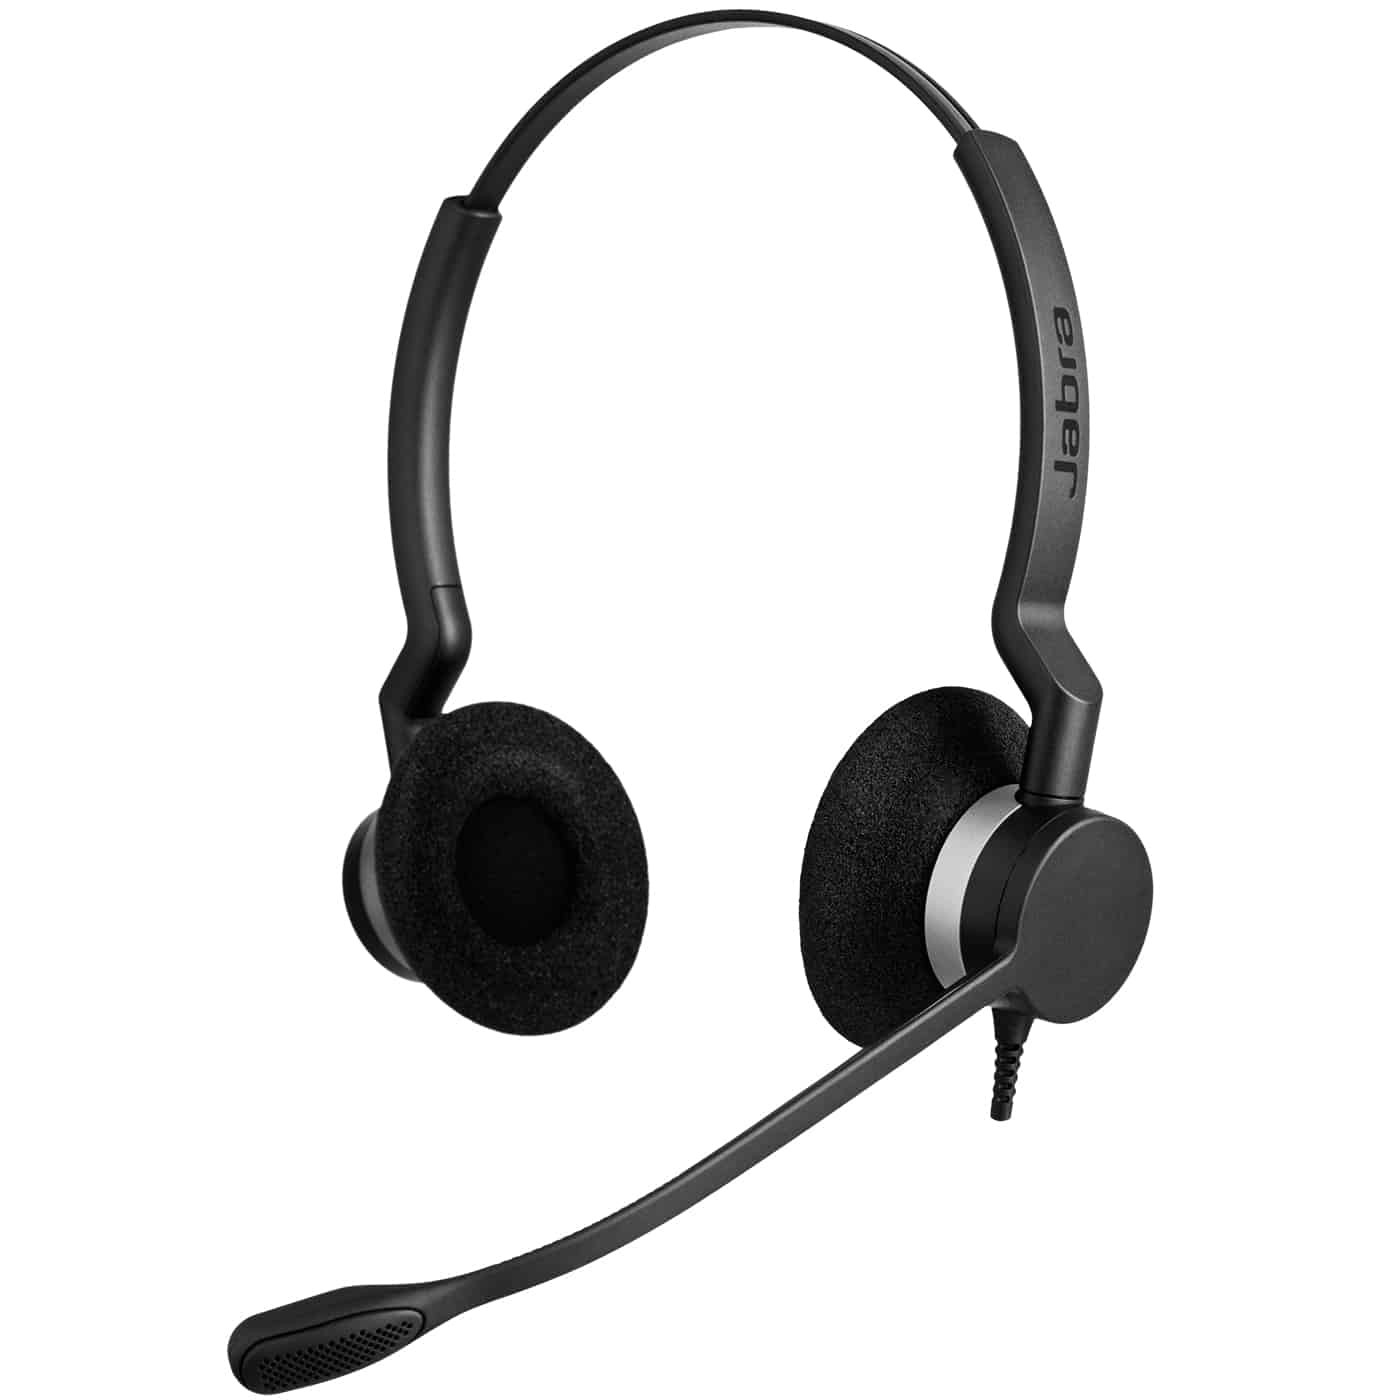 JA-2309-825-109 Jabra Biz 2300 DUO NC is built to survive in demanding contact centers, reducing the need to replace the headset.